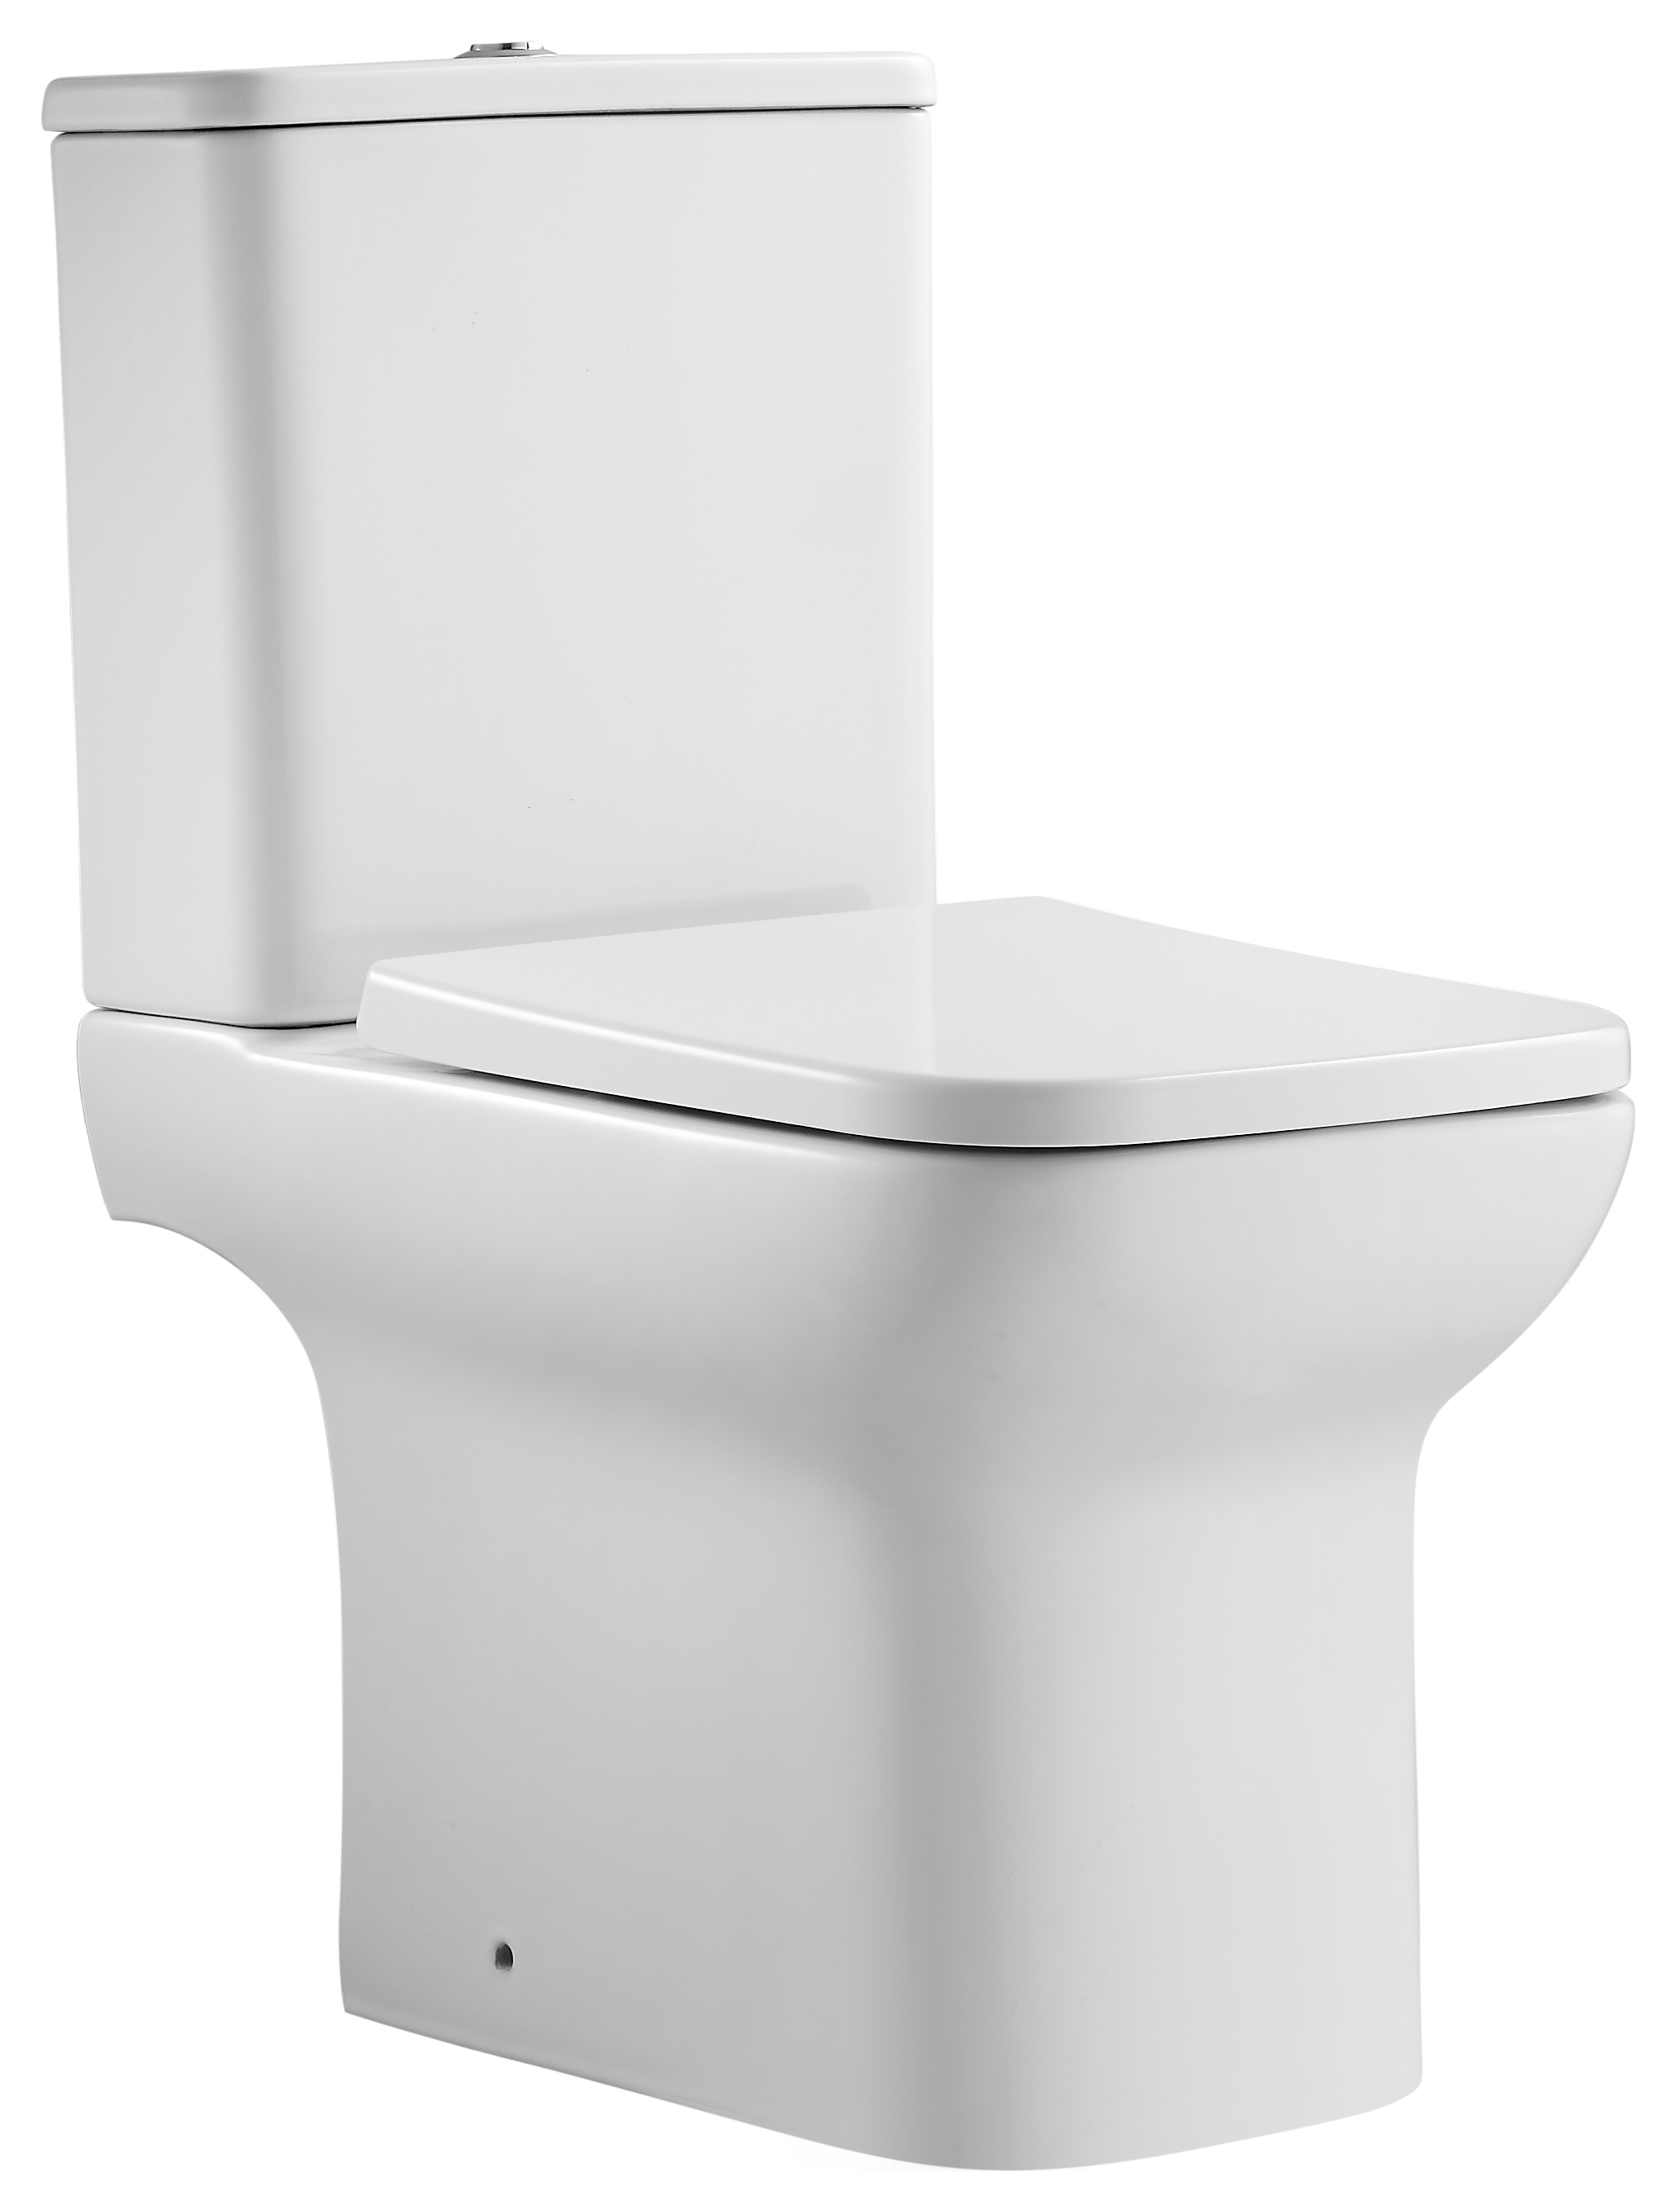 Image of Wickes Cleveland Easy Clean Close Coupled Toilet